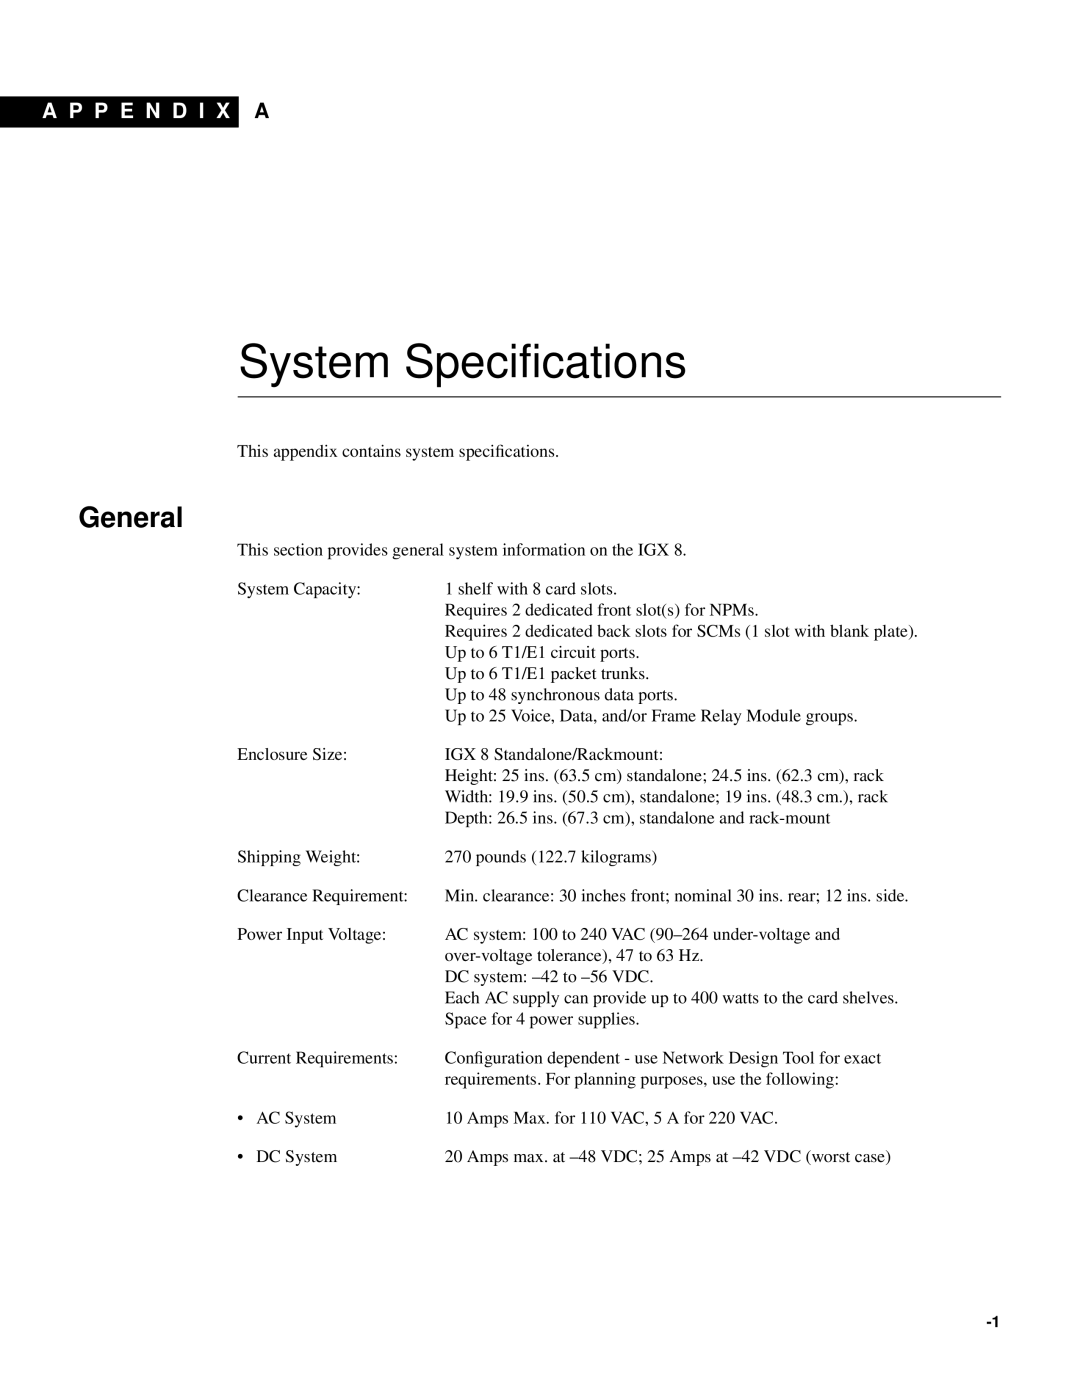 Cisco Systems IGX 8 appendix General, System Specifications, A P P E N D 